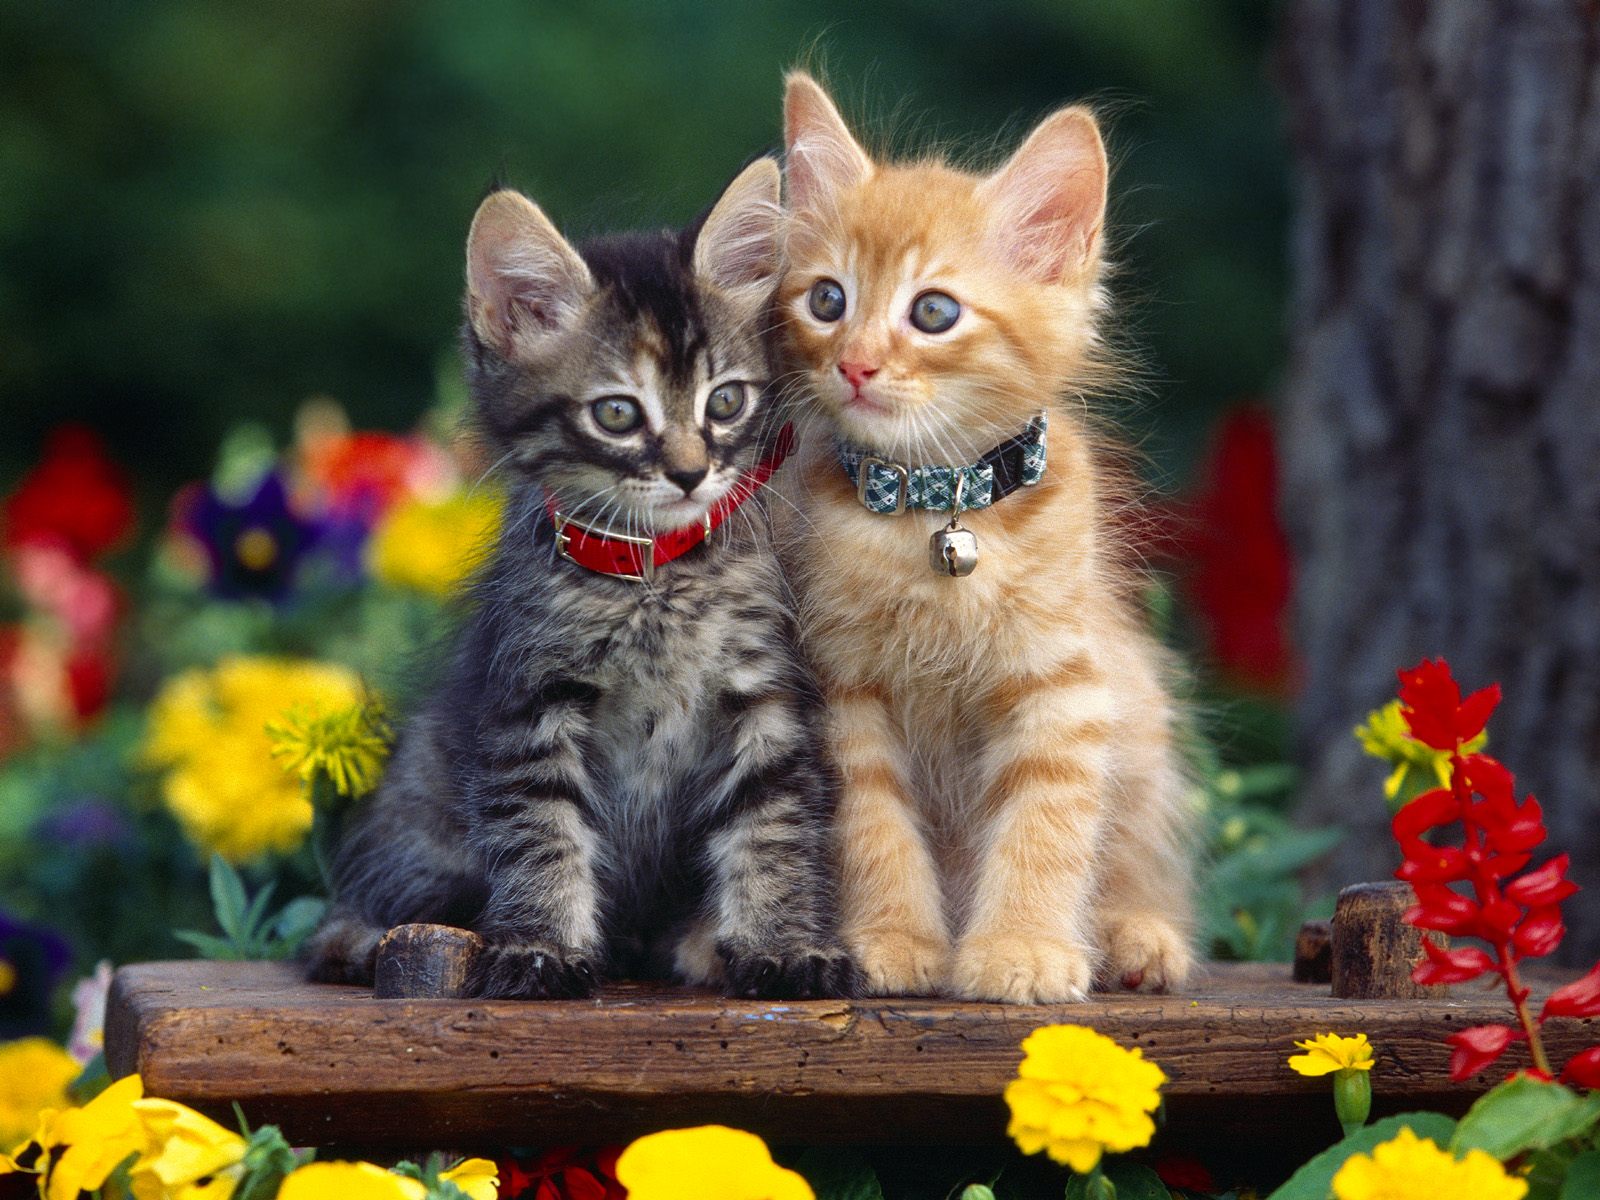 Free download Cute DogsPets Cute Cats and Kittens Pictures and 